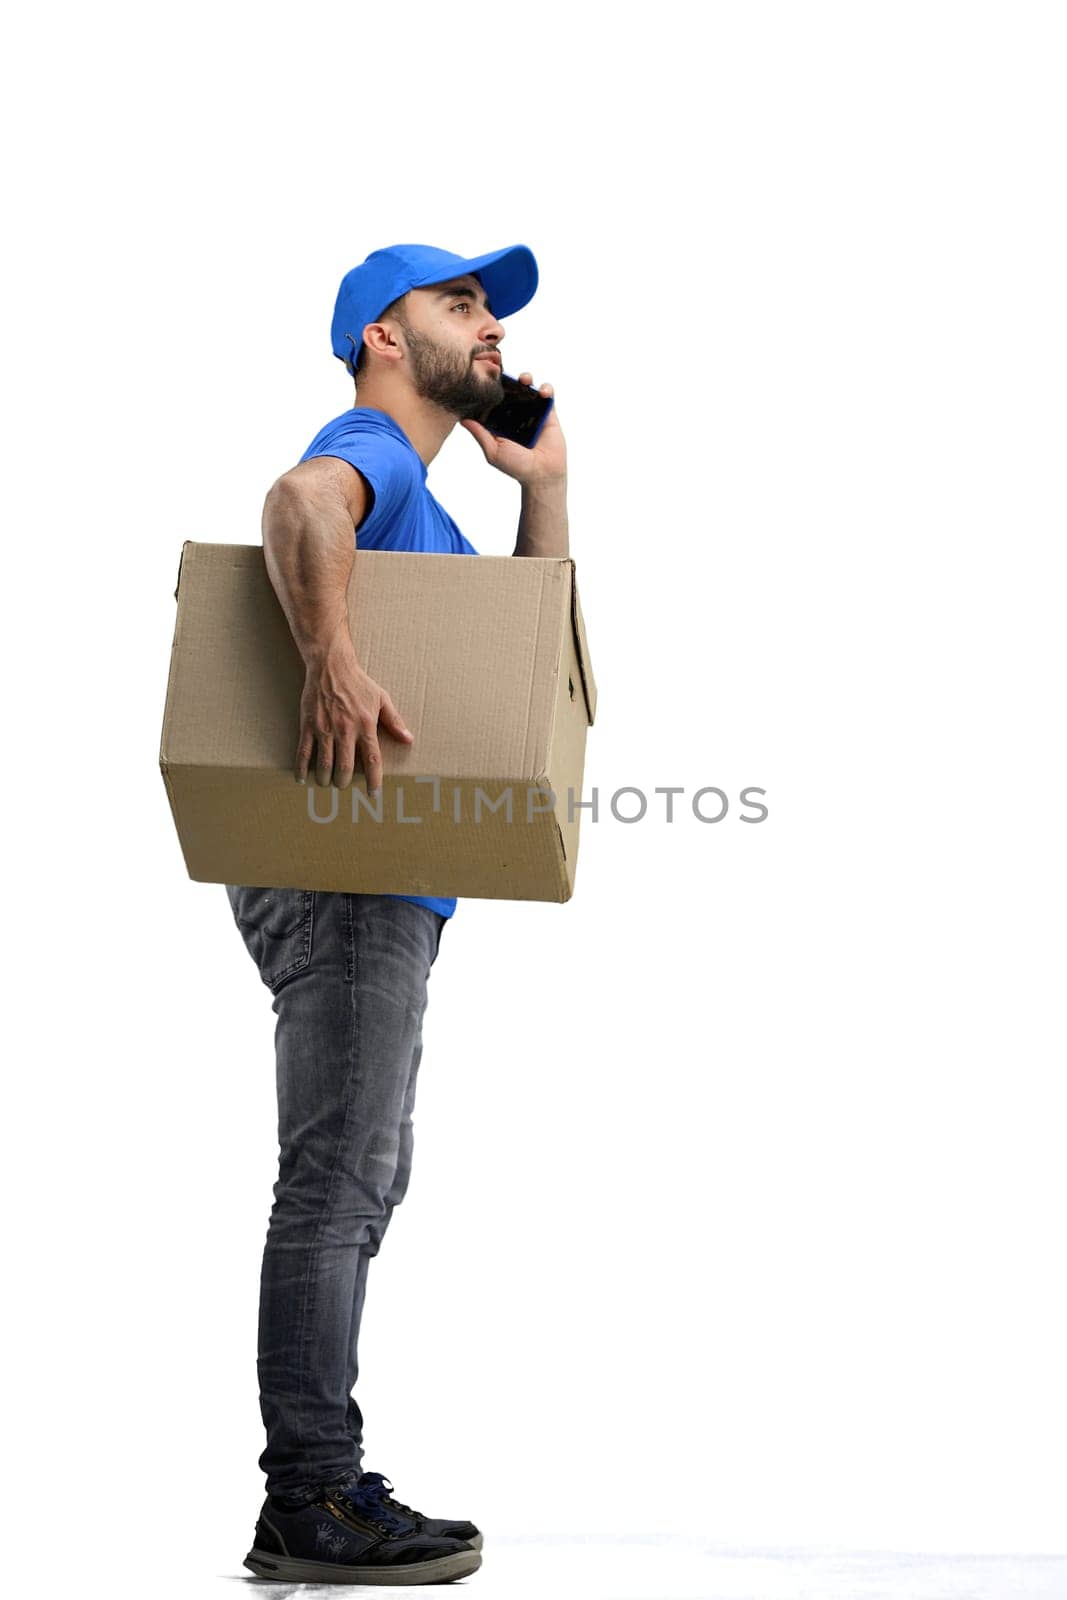 The deliveryman, in full height, on a white background, talking on the phone.